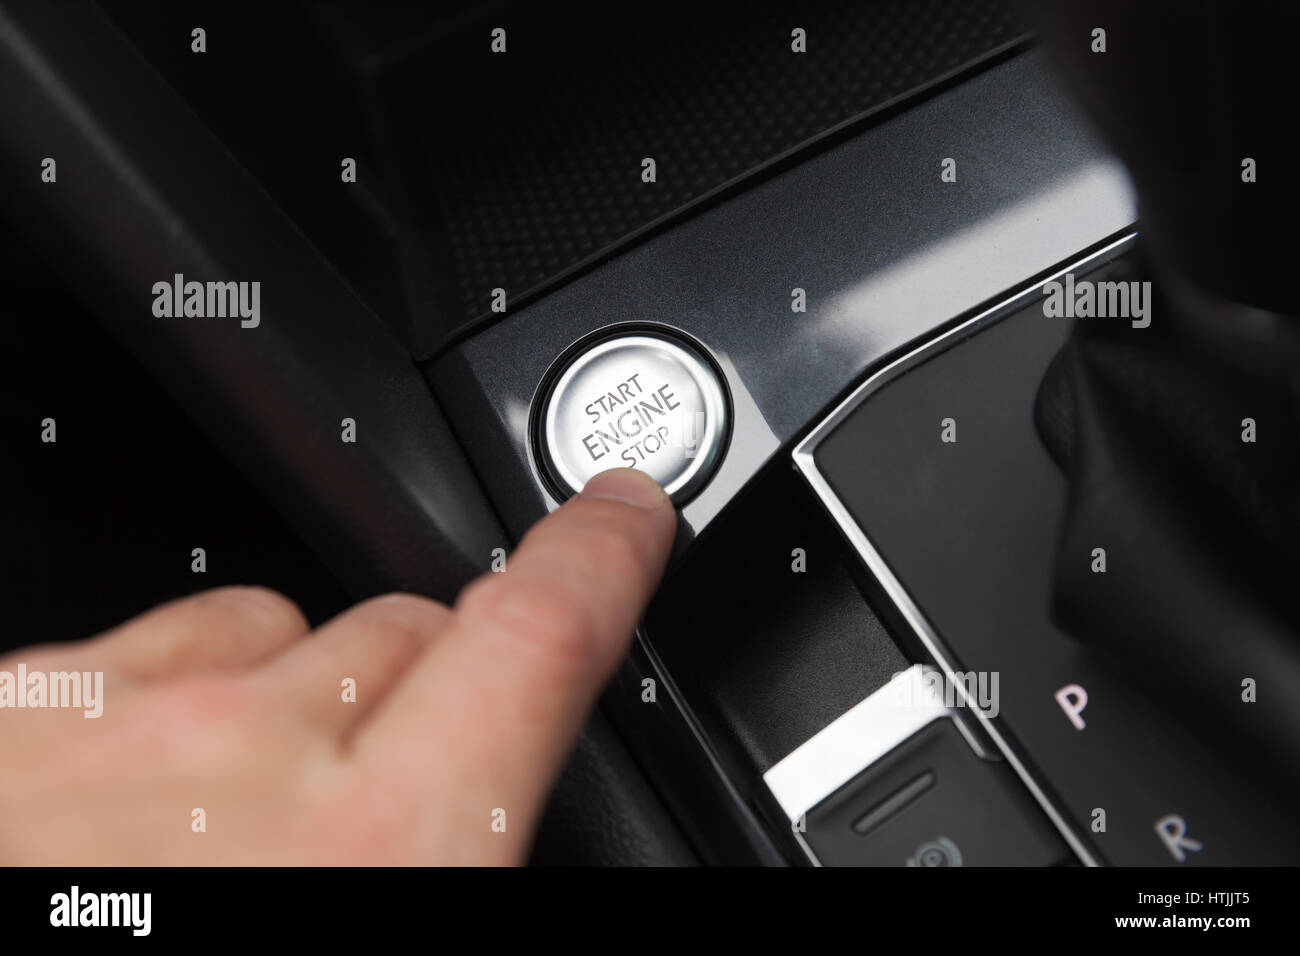 Driver hand pushes engine start stop button. Modern luxury crossover car interior details Stock Photo